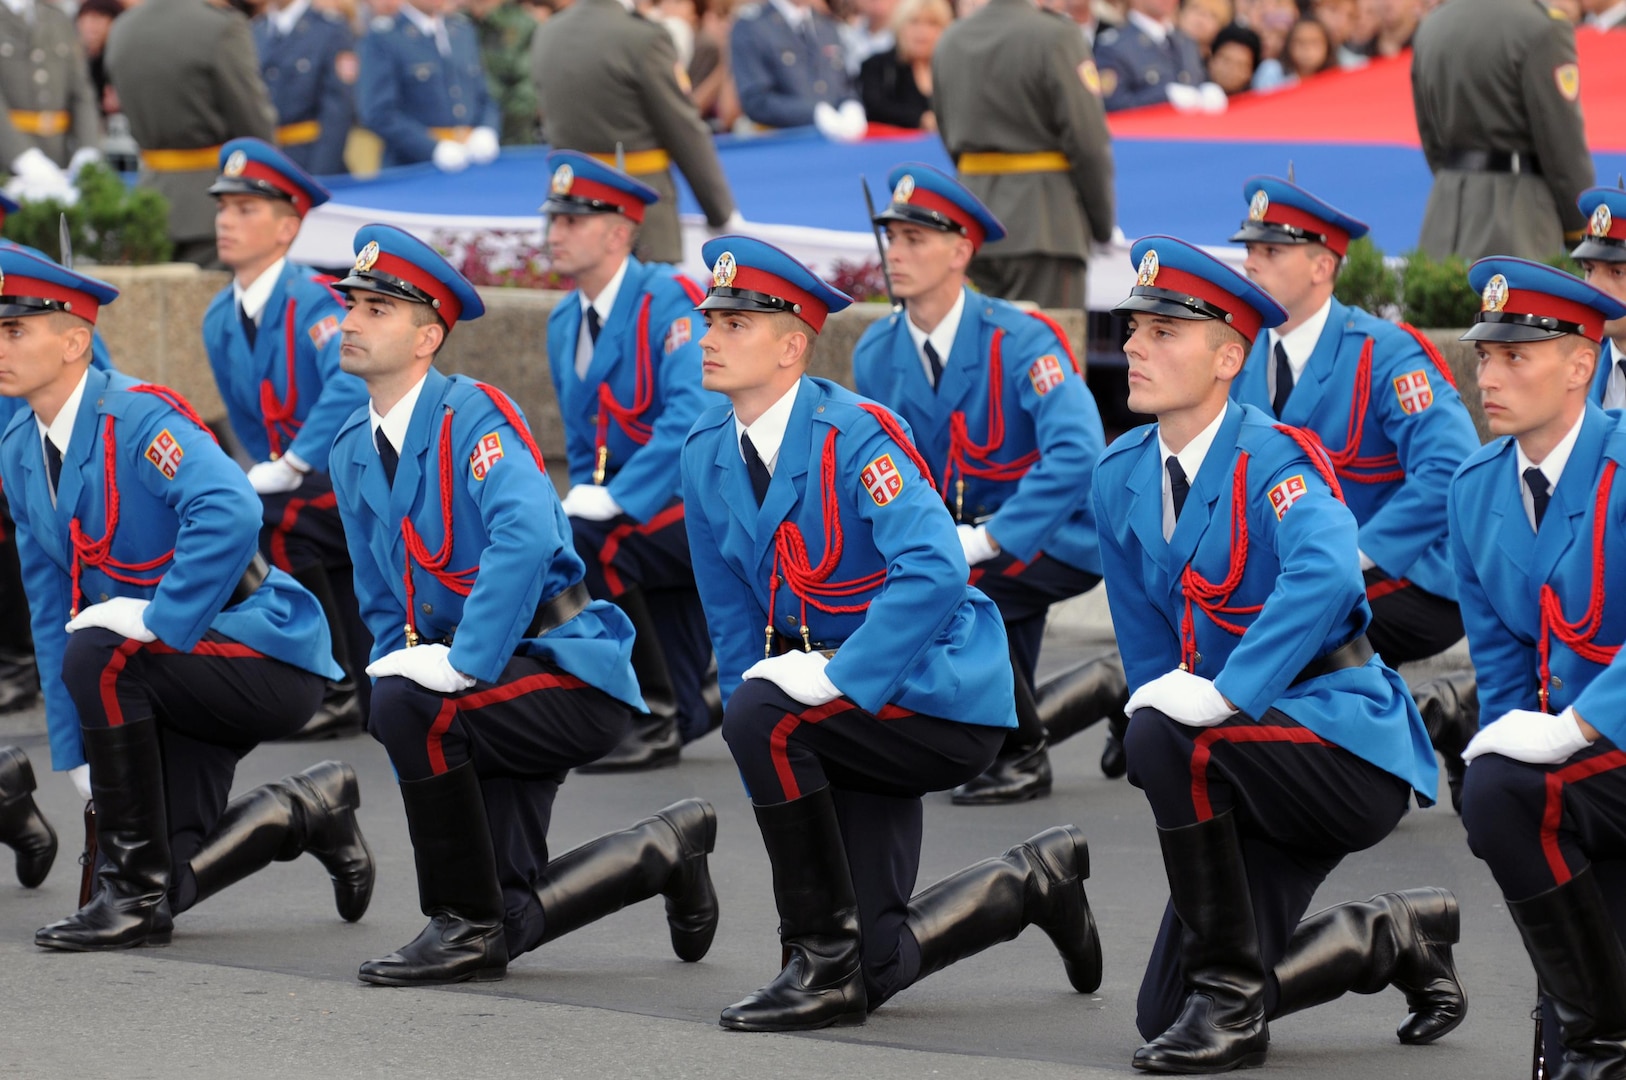 Officer cadets from Serbia's Military Academy take part in a graduation
ceremony in front of the National Assembly of the Republic of Serbia in
Belgrade, Serbia, on Sept. 11, 2010, attended by Air Force Gen. Craig
McKinley, the chief of the National Guard Bureau, Army Maj. Gen. Gregory
Wayt, the adjutant general of the Ohio National Guard and other Guard
leaders. Serbia is Ohio's partner in the 62-nation National Guard State Partnership
Program.